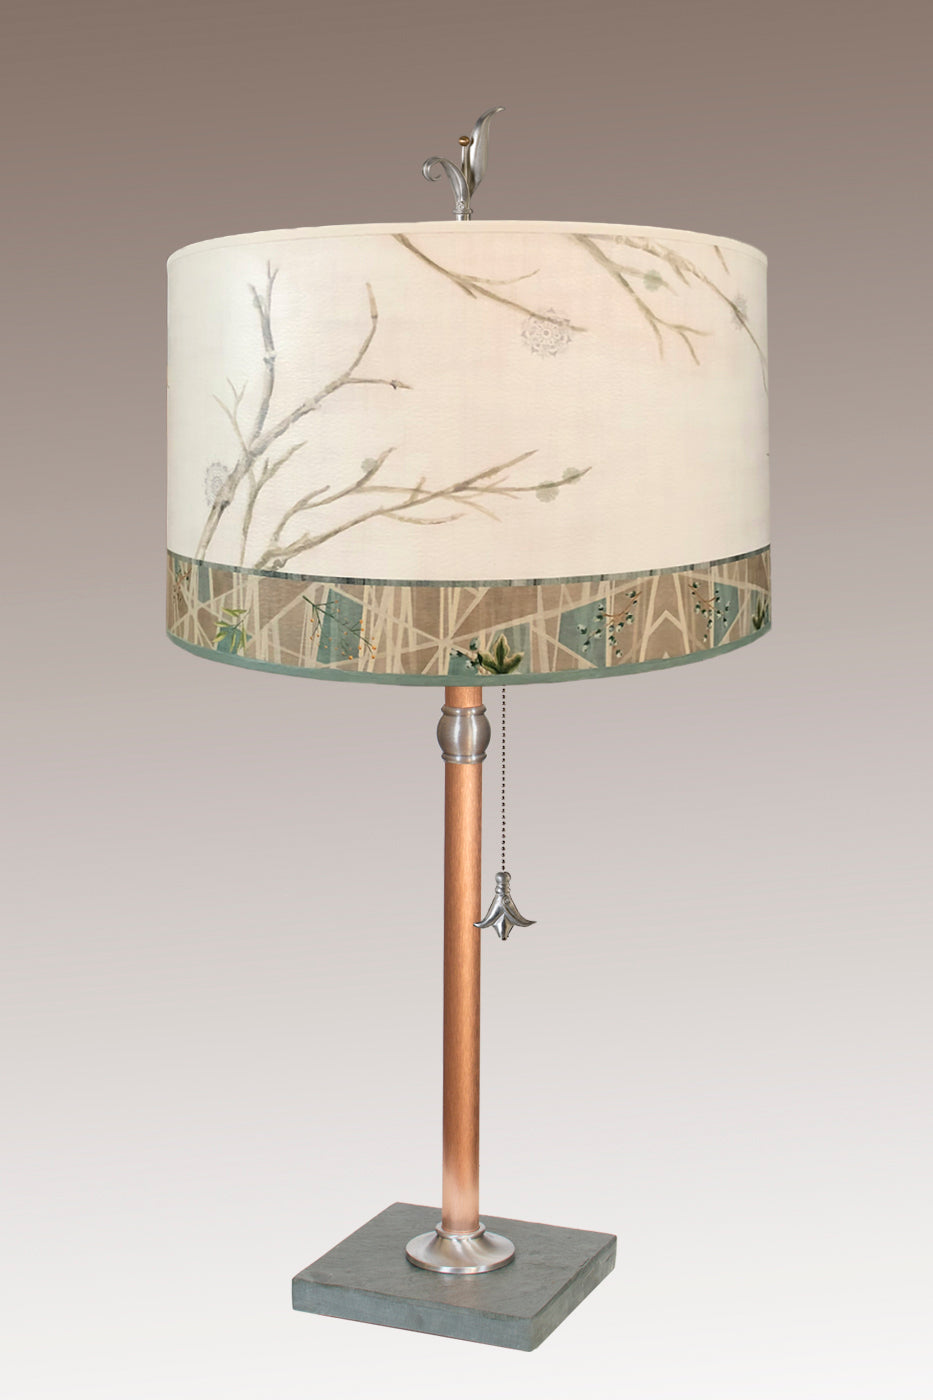 Copper Table Lamp with Large Drum Shade in Prism Branch